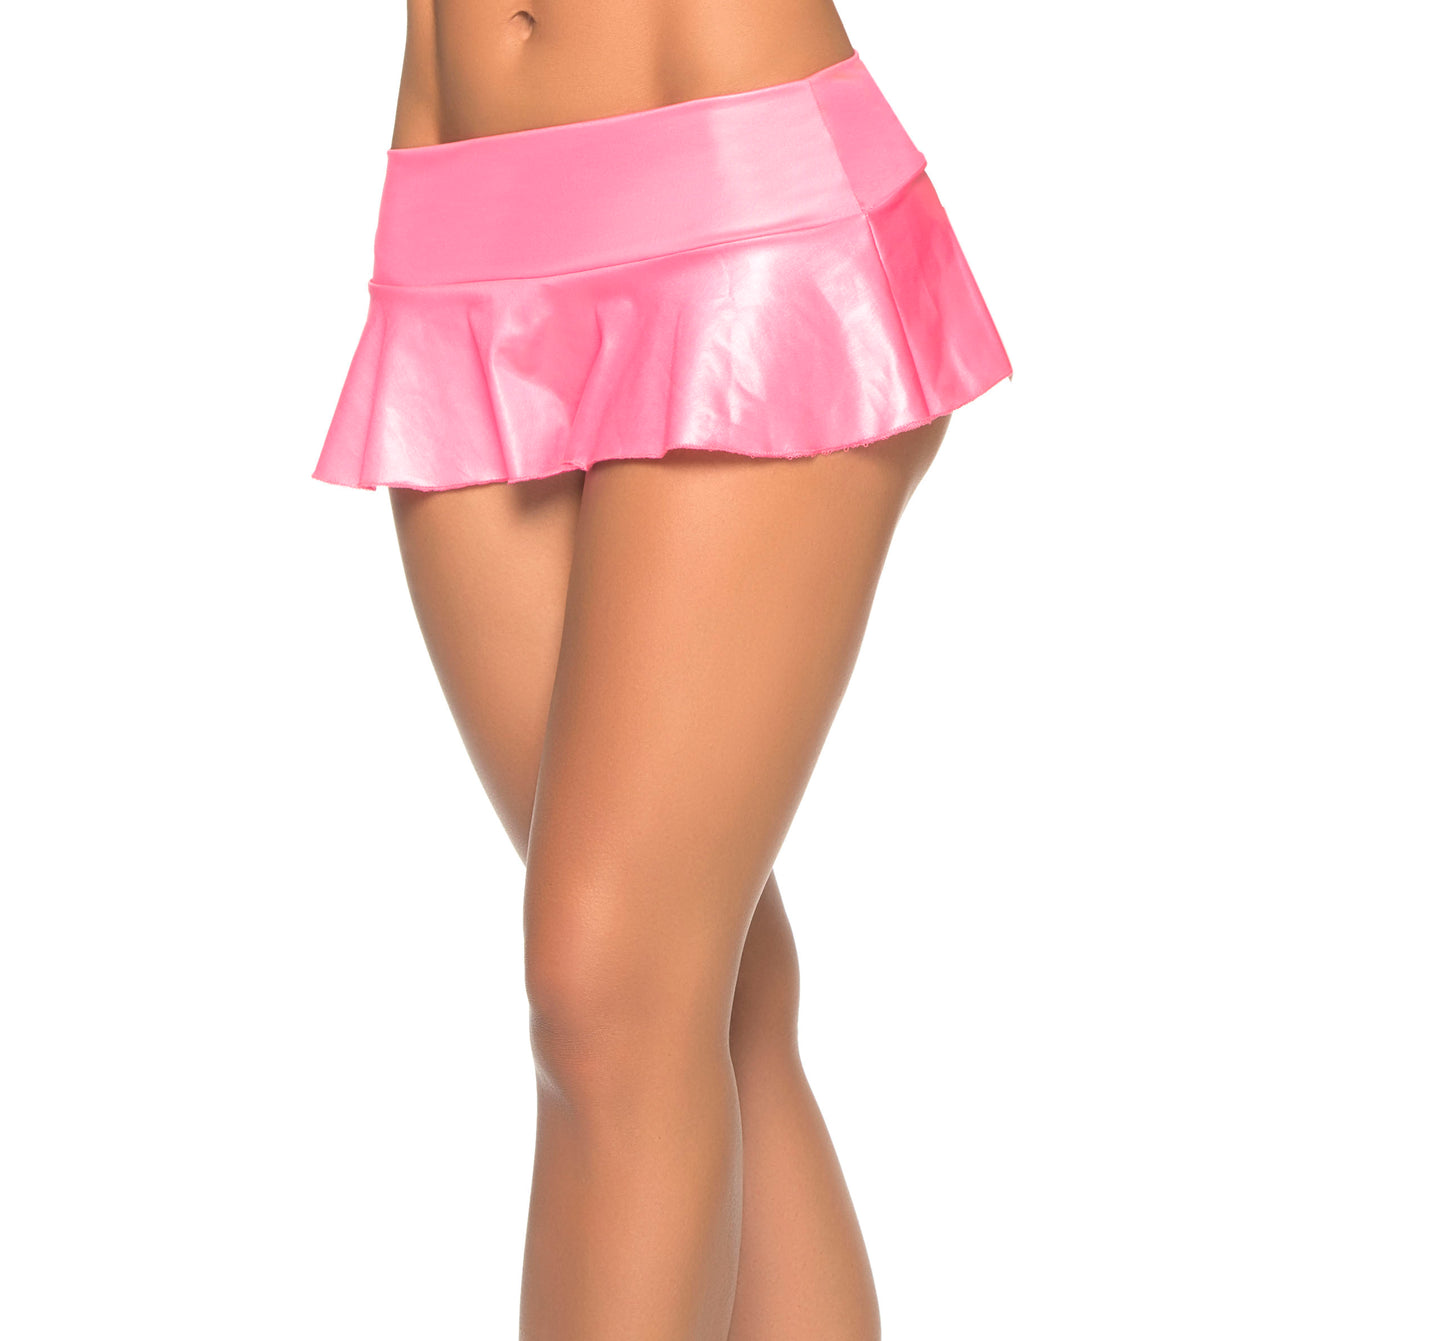 Pink Wet Look Ruffle Skirt<br><span>Fun, flirty and fabulous! Our ruffle skirt is the perfect pretty little standby that should be a part of every wondrous wardrobe! This sexy staple is Perfect for dressing up your cami and sandals or top off your swimsuit as the perfect cover-up. </span>